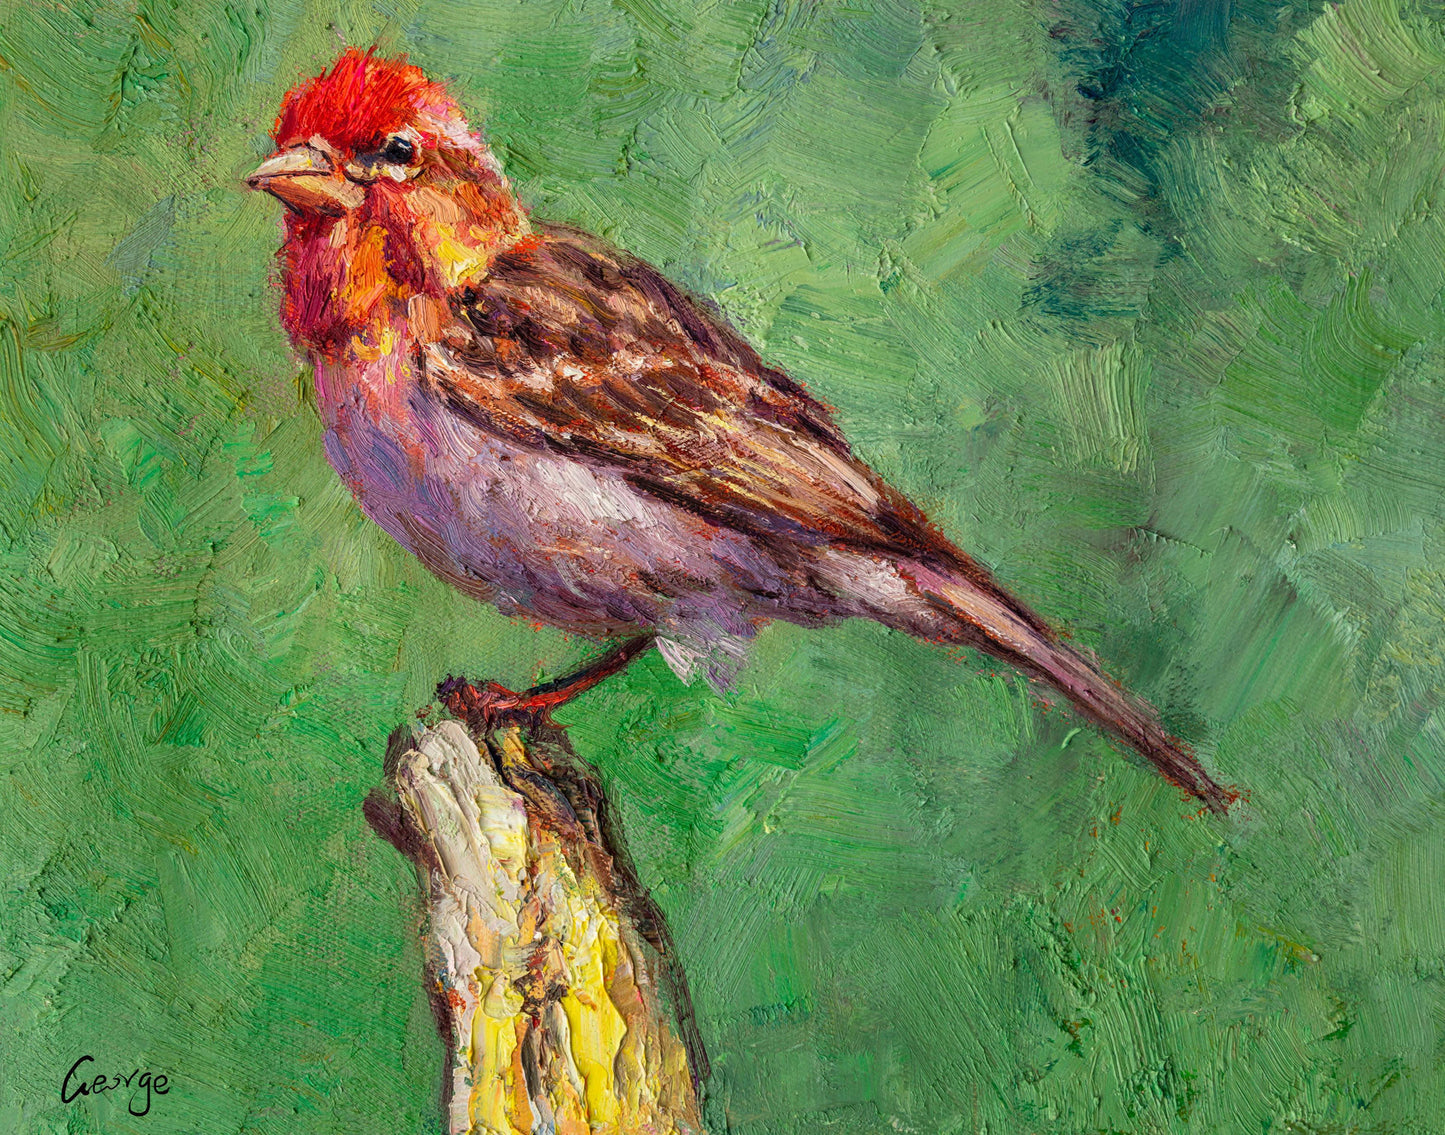 Oil Painting House Finch Bird Artwork, Contemporary Art, Living Room Wall Decor, Painting Abstract, Canvas Wall Decor, Original Painting